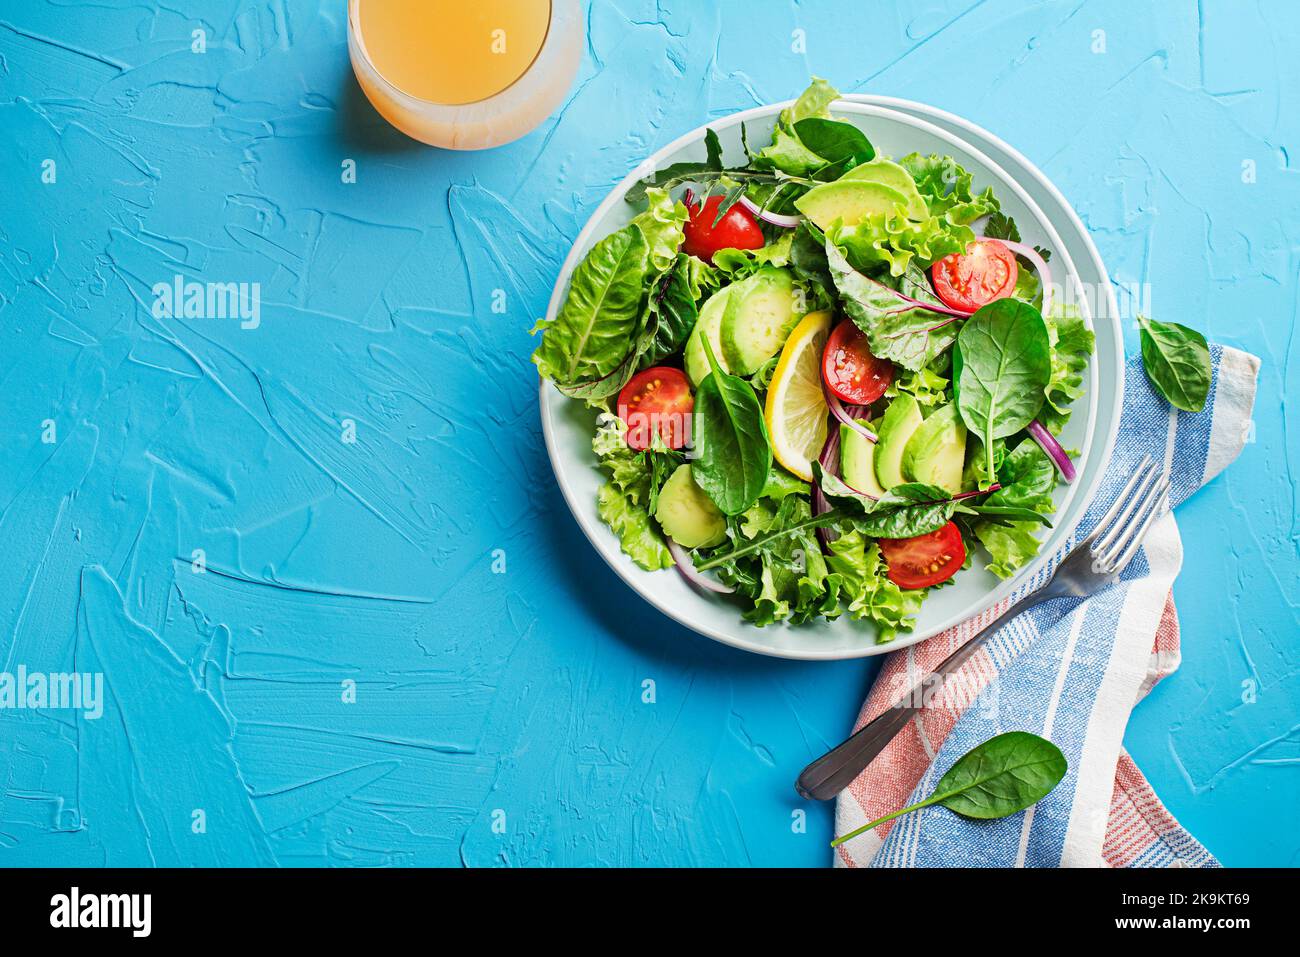 Healthy green salad with avocado and fresh vegetables on blue table close up Stock Photo